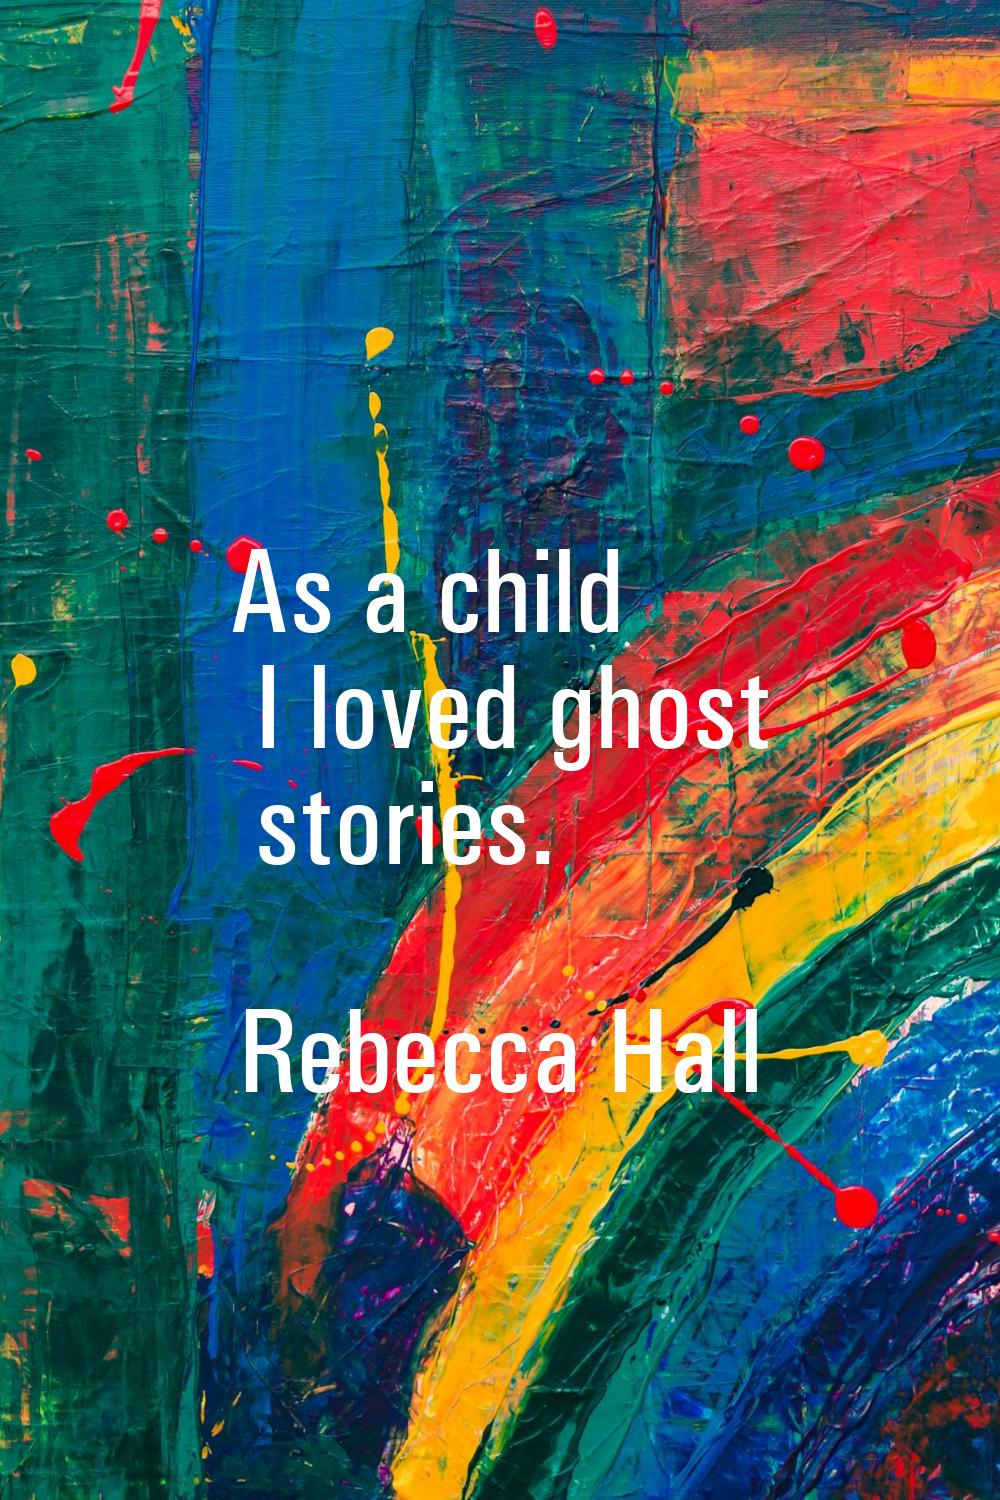 As a child I loved ghost stories.